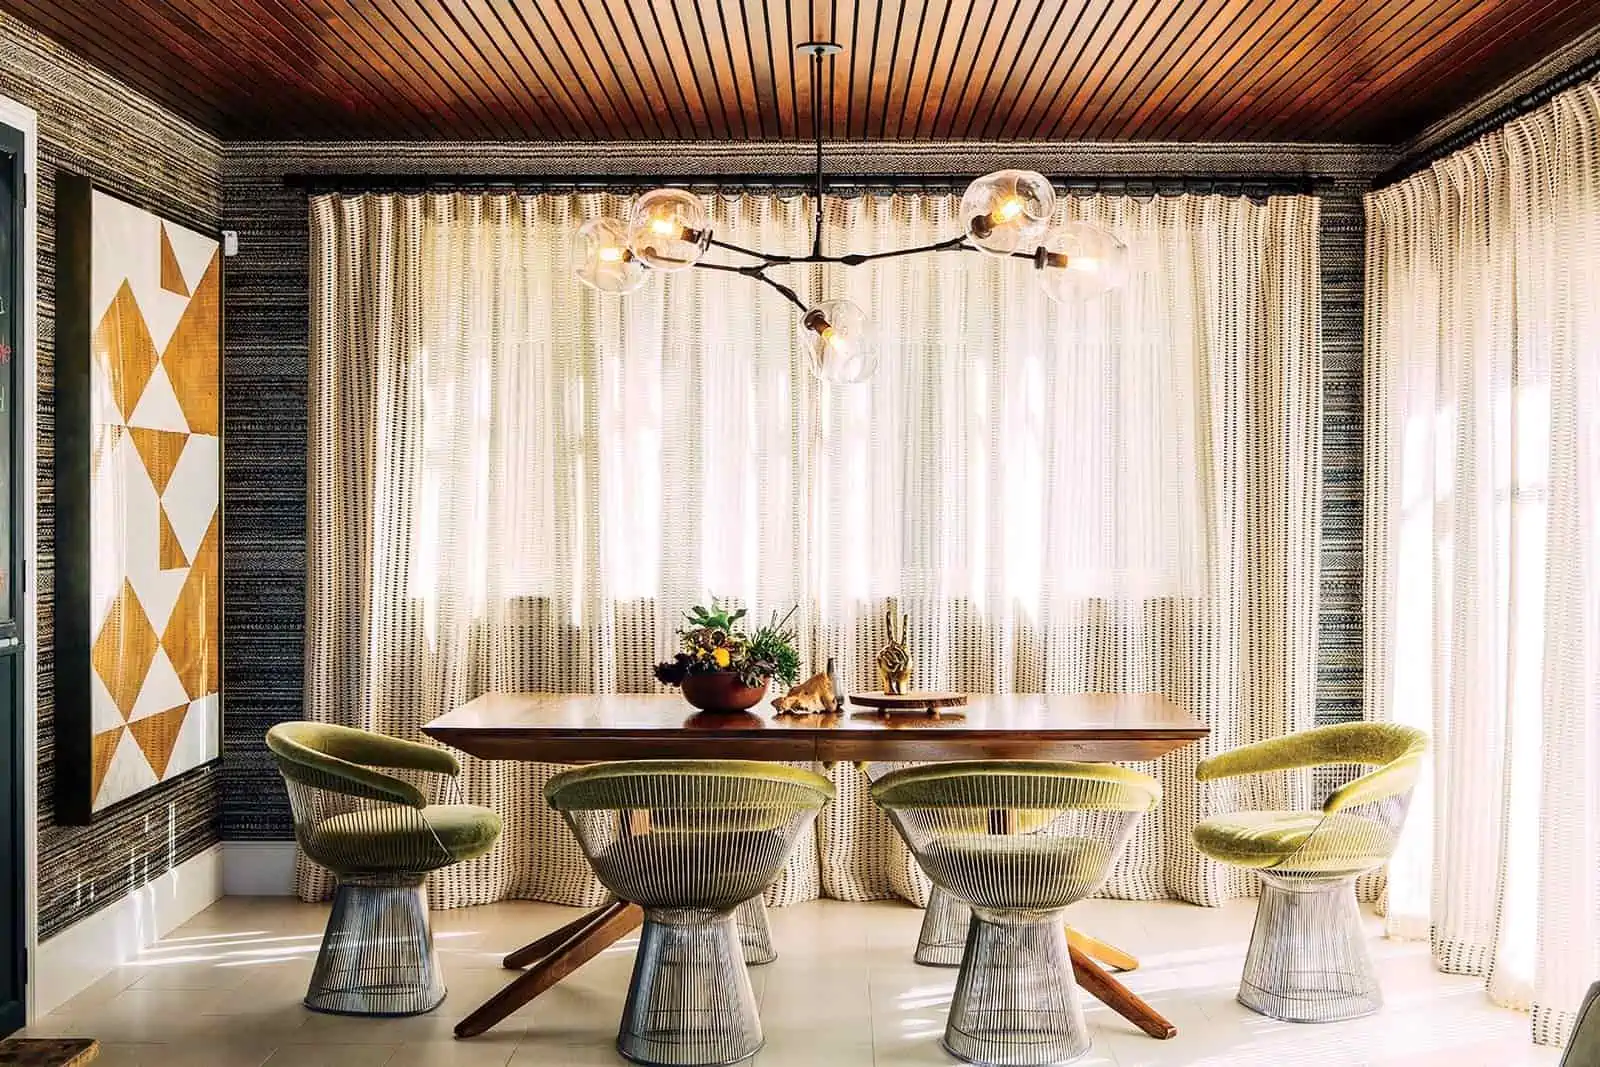 Classy Platner Armchair dining set with metallic frame and a padded seat with a pattern wall painting and metallic finish curtains.